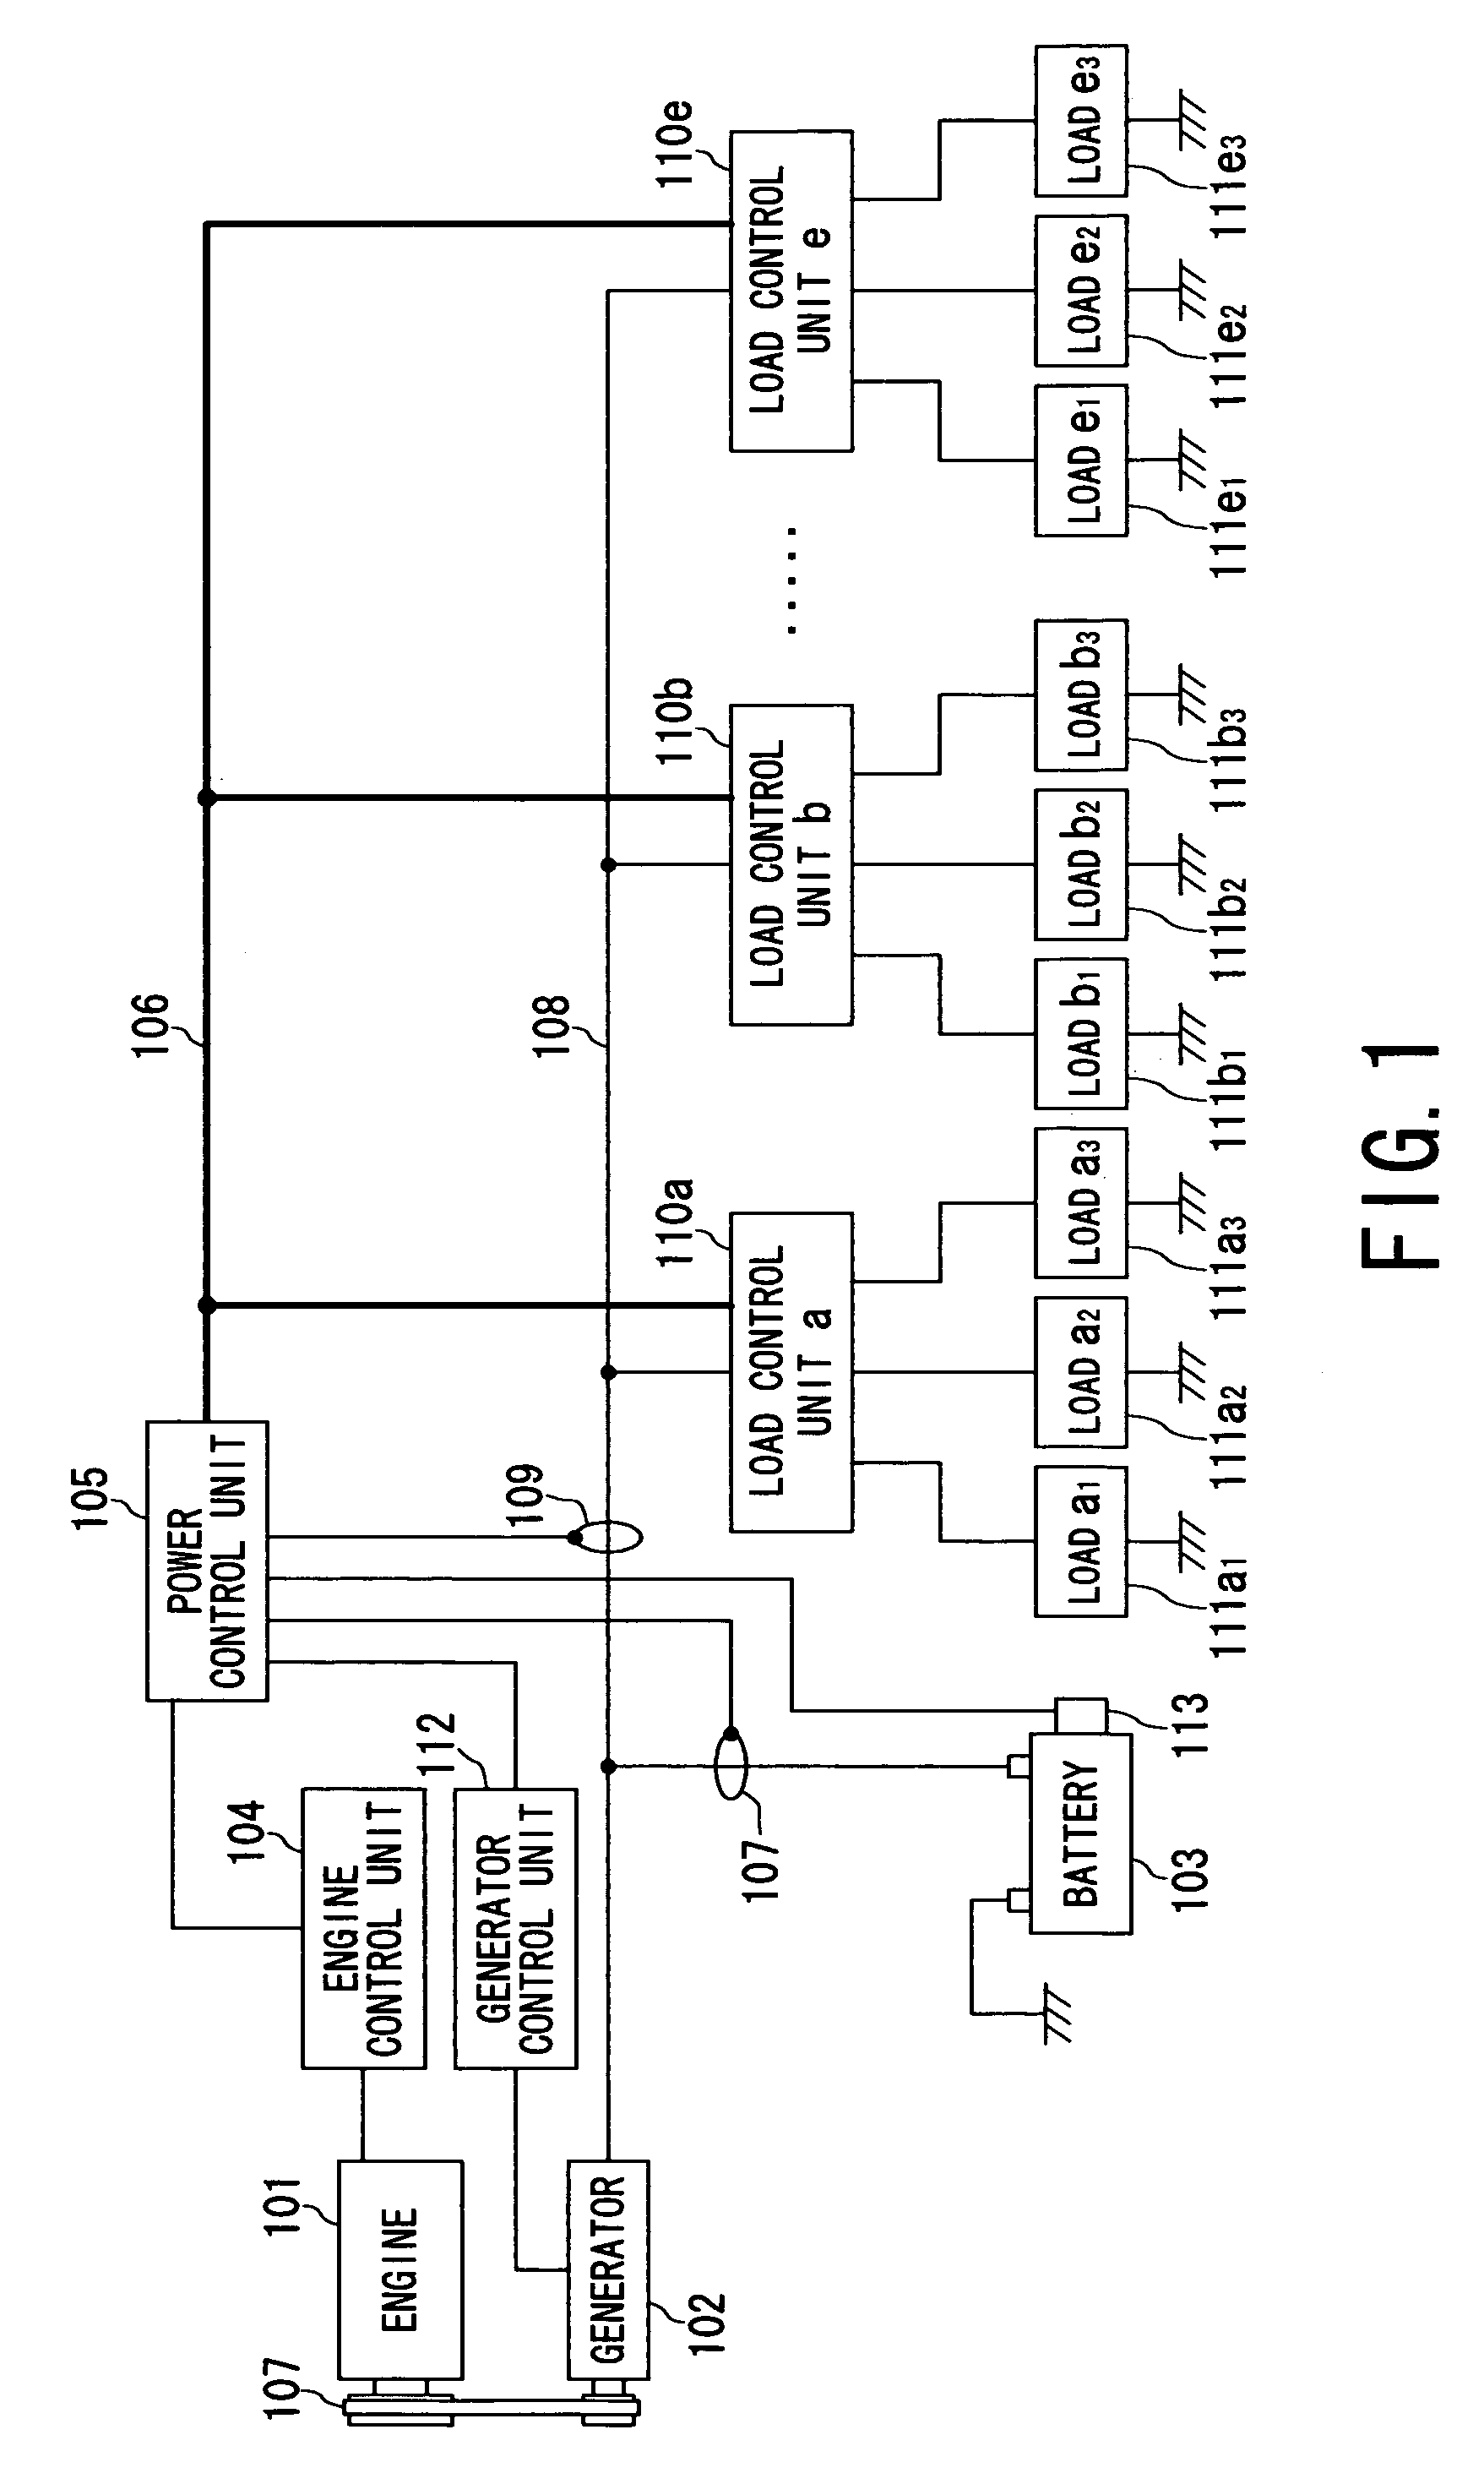 Method and apparatus for driving and controlling on-vehicle loads